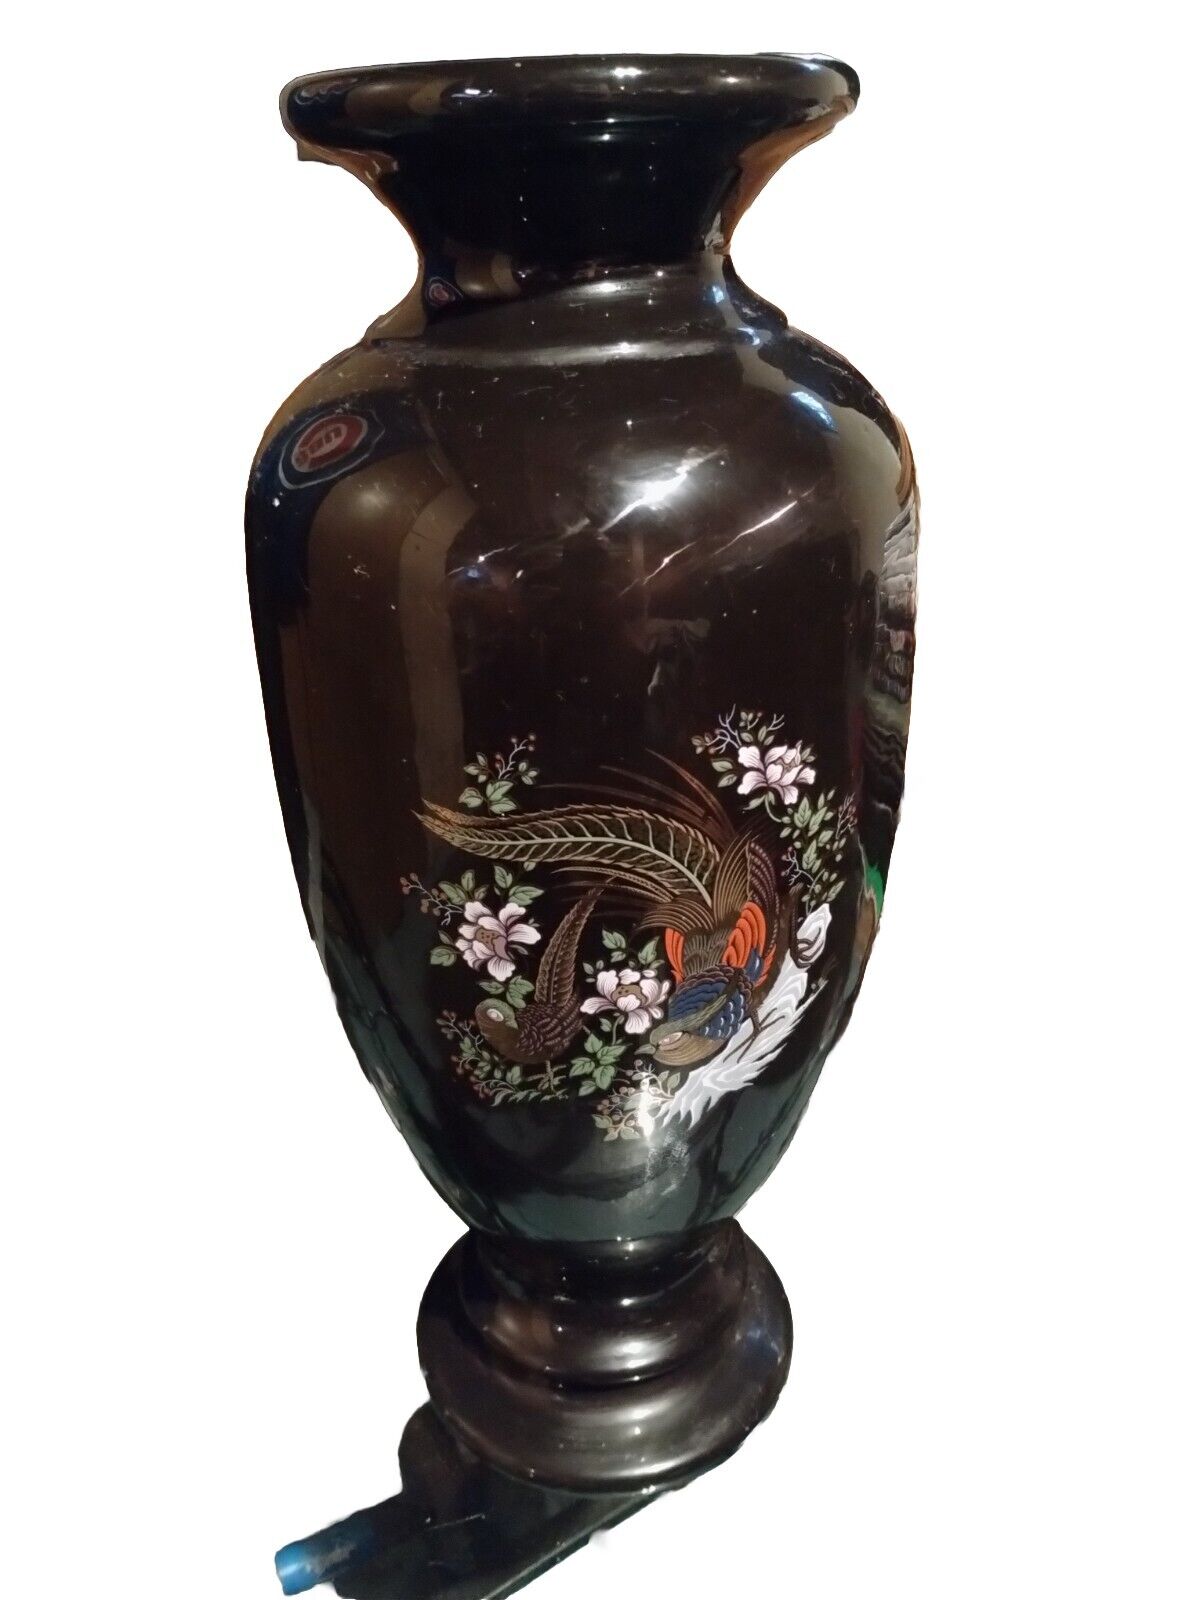 Vintage Japanese Art Floral Bird Vase 17 Inches Tall No scratches or dents 